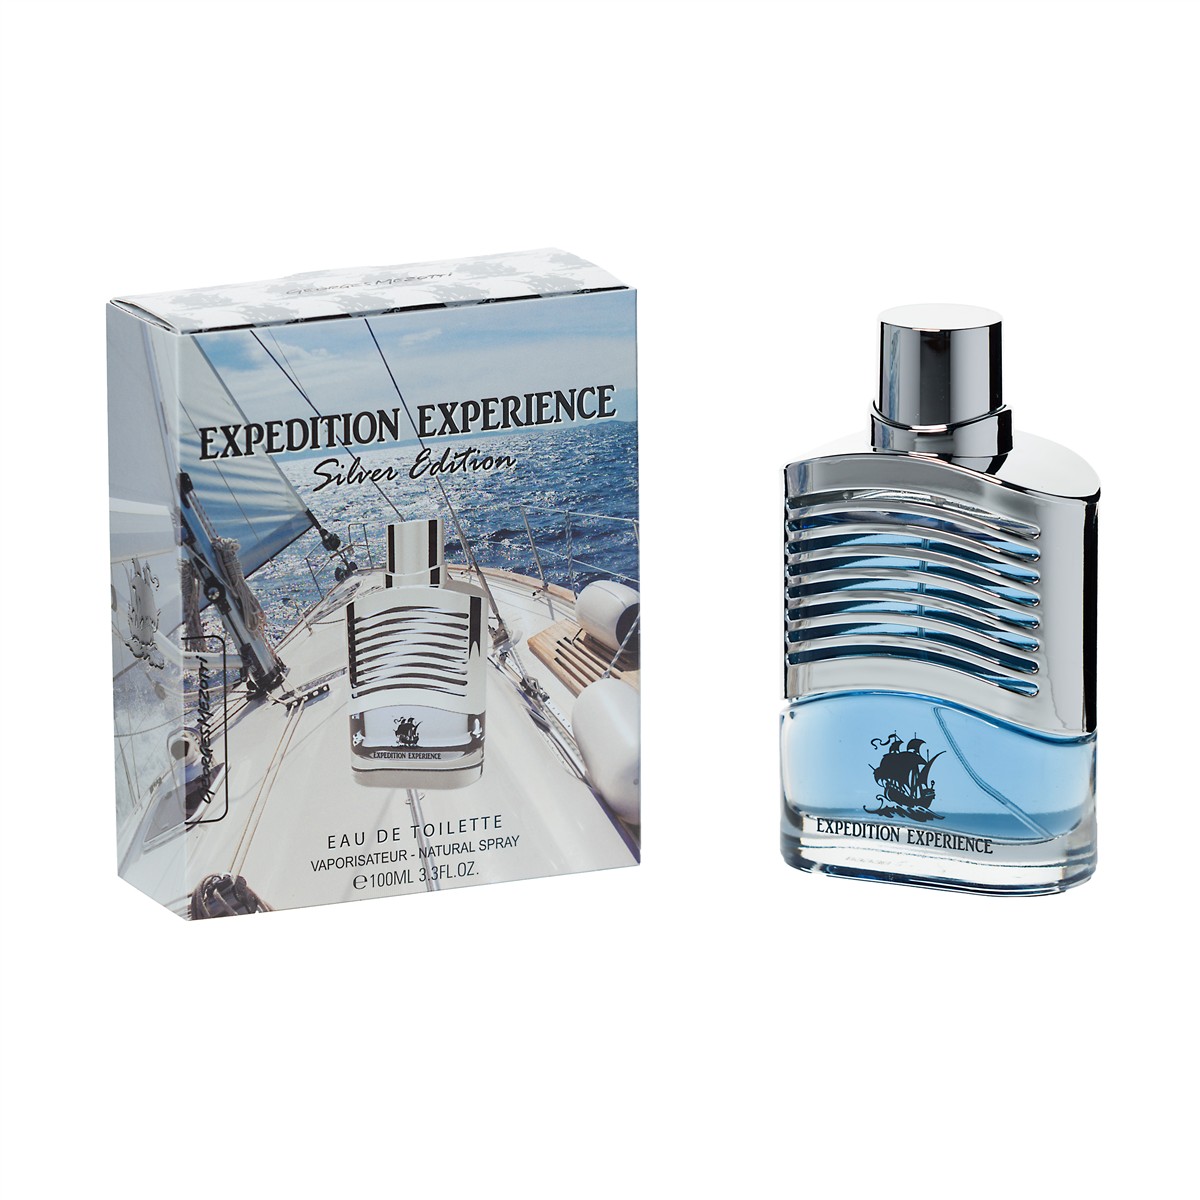 Featured image for “Expedition Experience Silver”